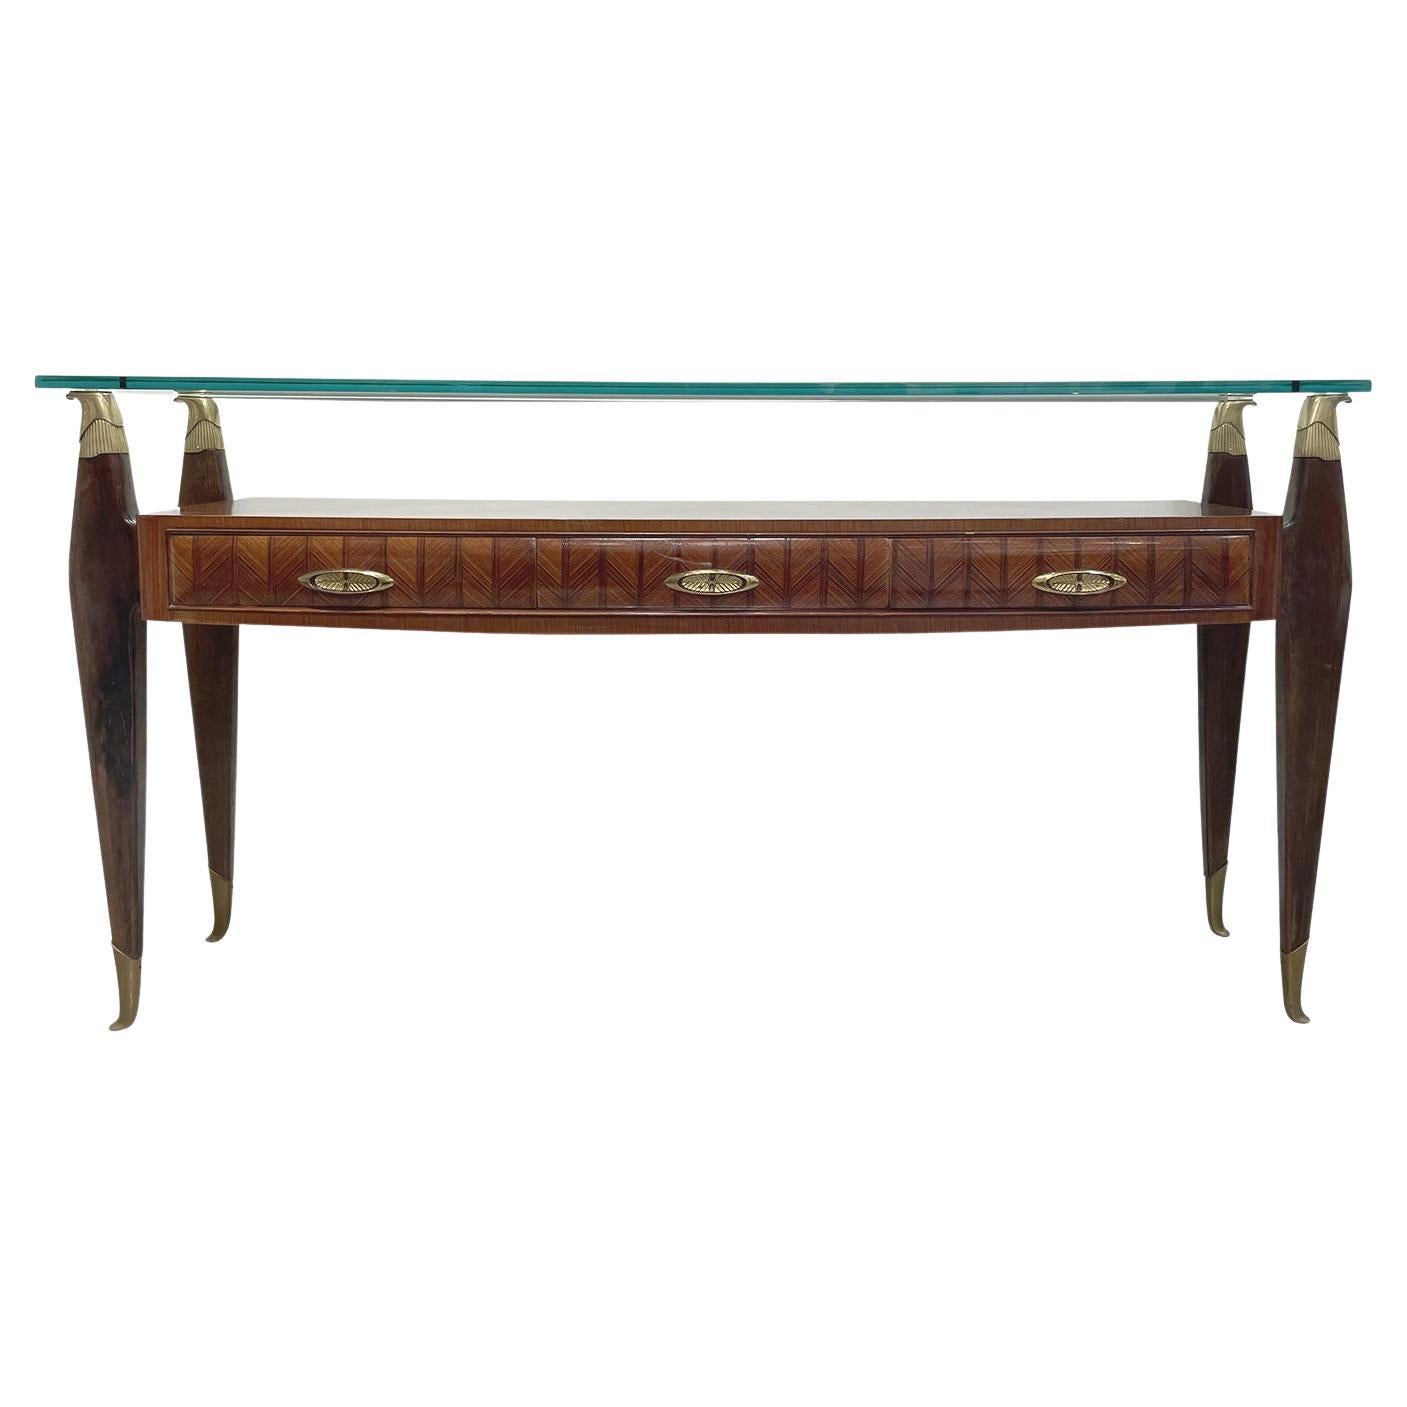 20th Century Italian Vintage Rosewood Glass Console Table Attributed to Borsani